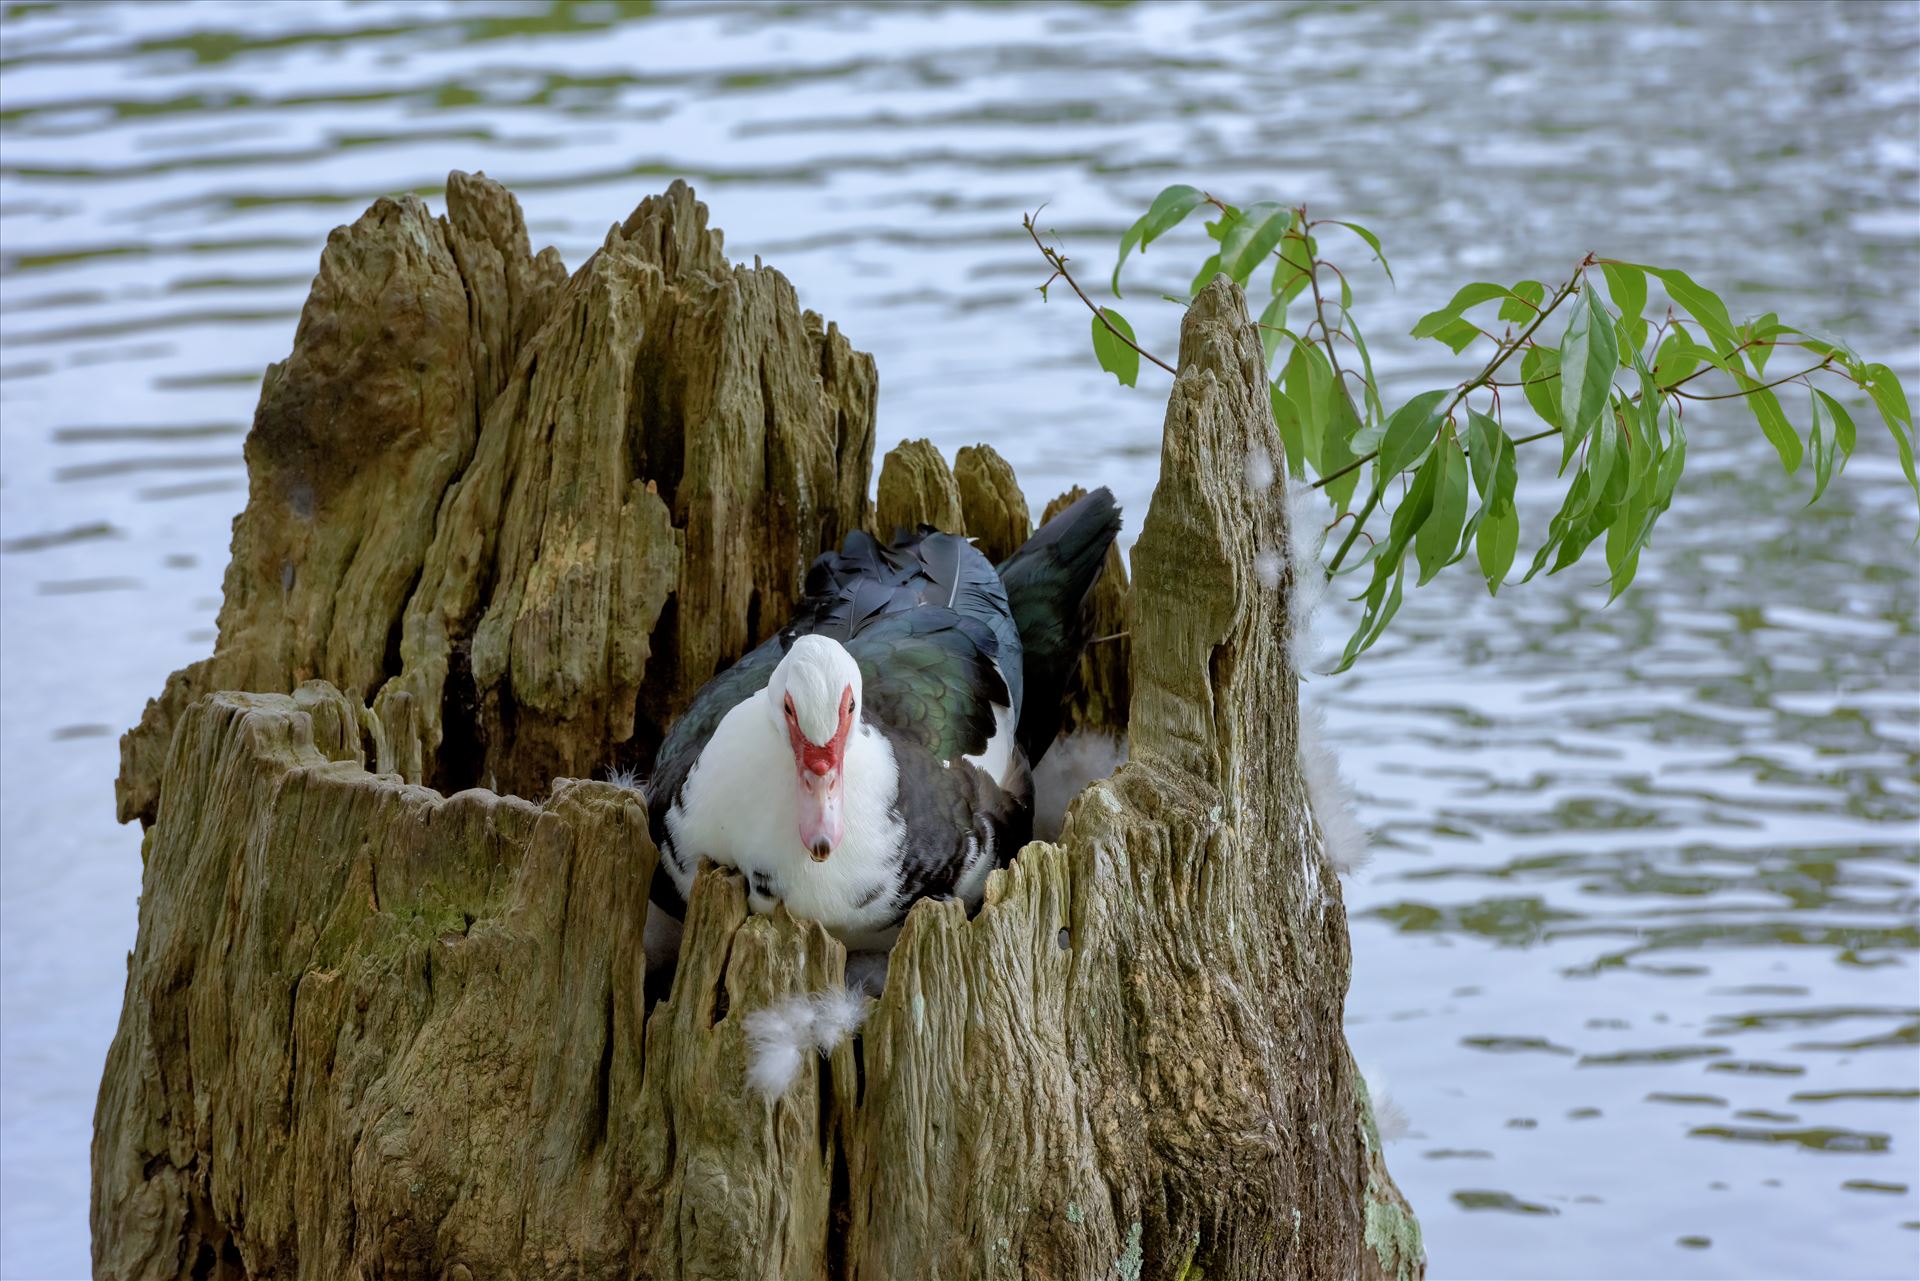 duck sitting on eggs in hollowed out tree stump lake caroline ss alamy 8106733.jpg -  by Terry Kelly Photography